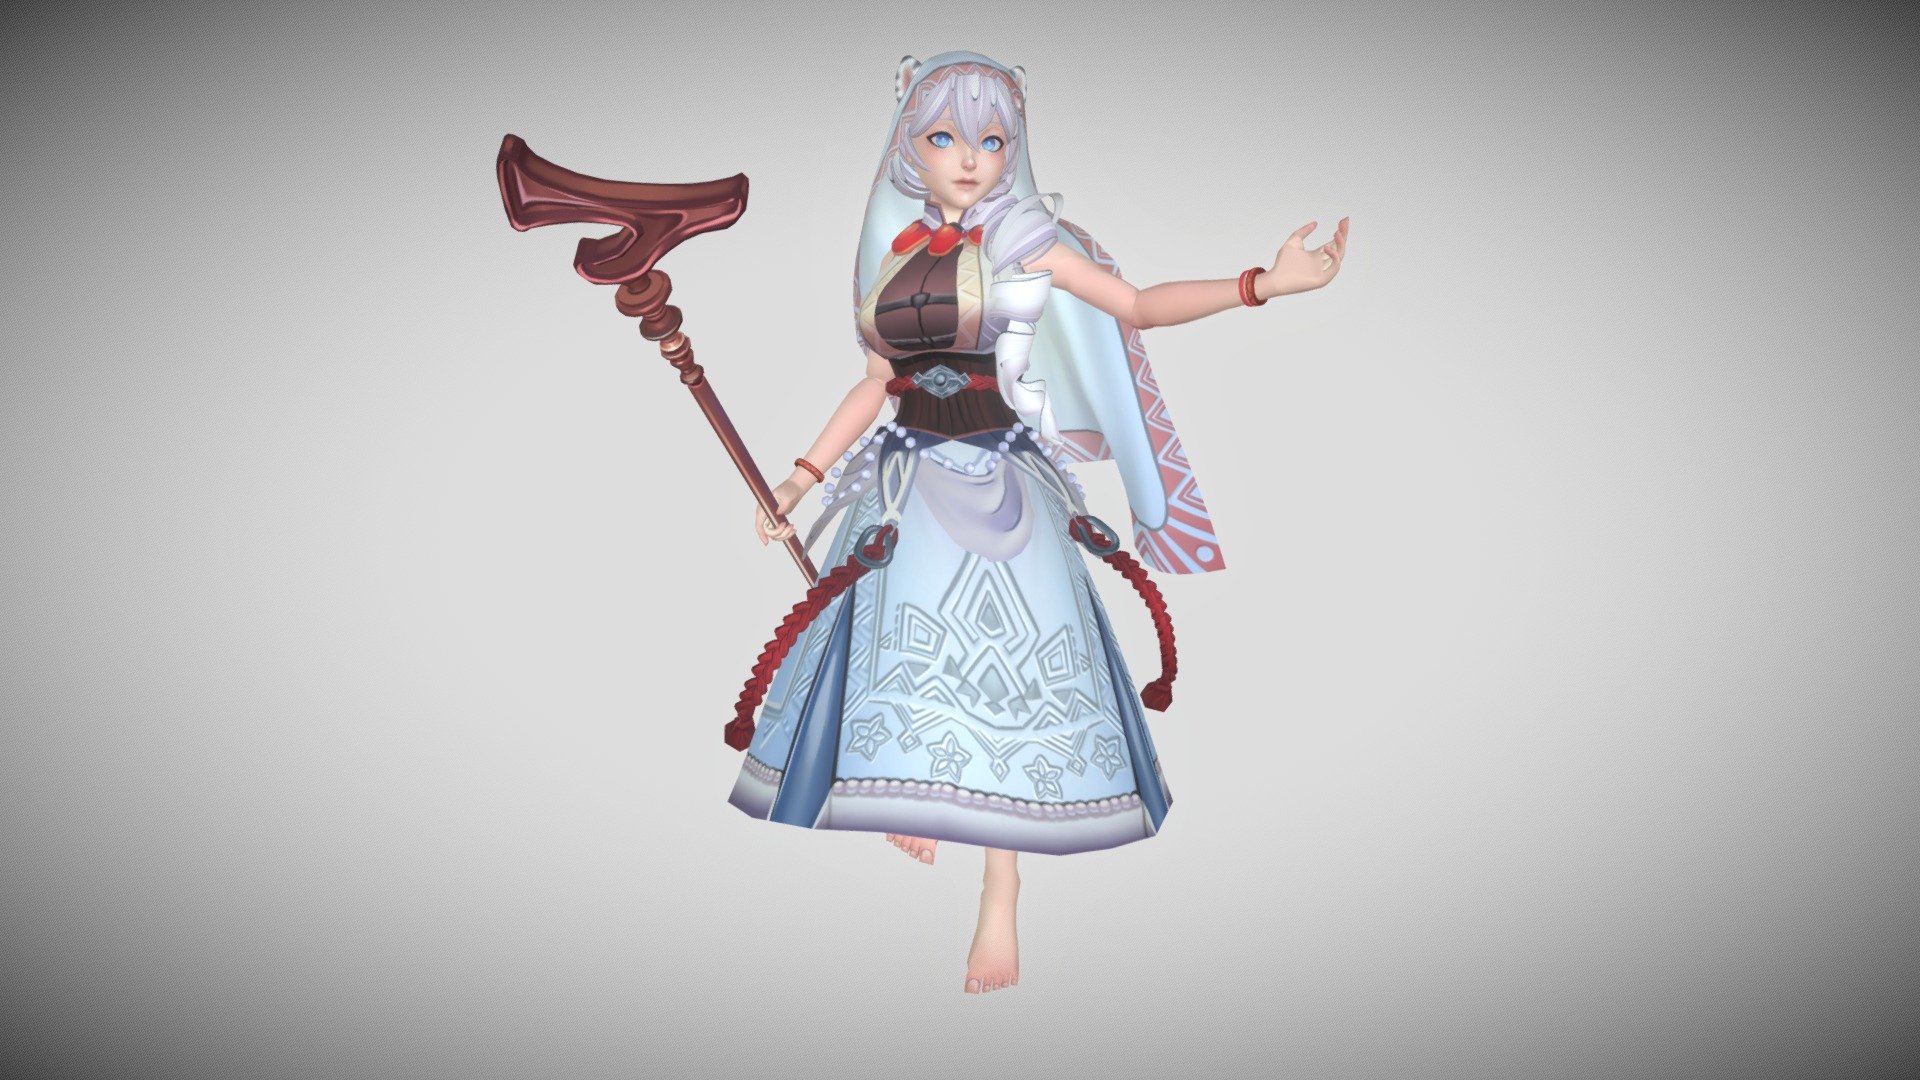 Kanna from Guardian Tales made with Blender and textured with Procreate 3d model